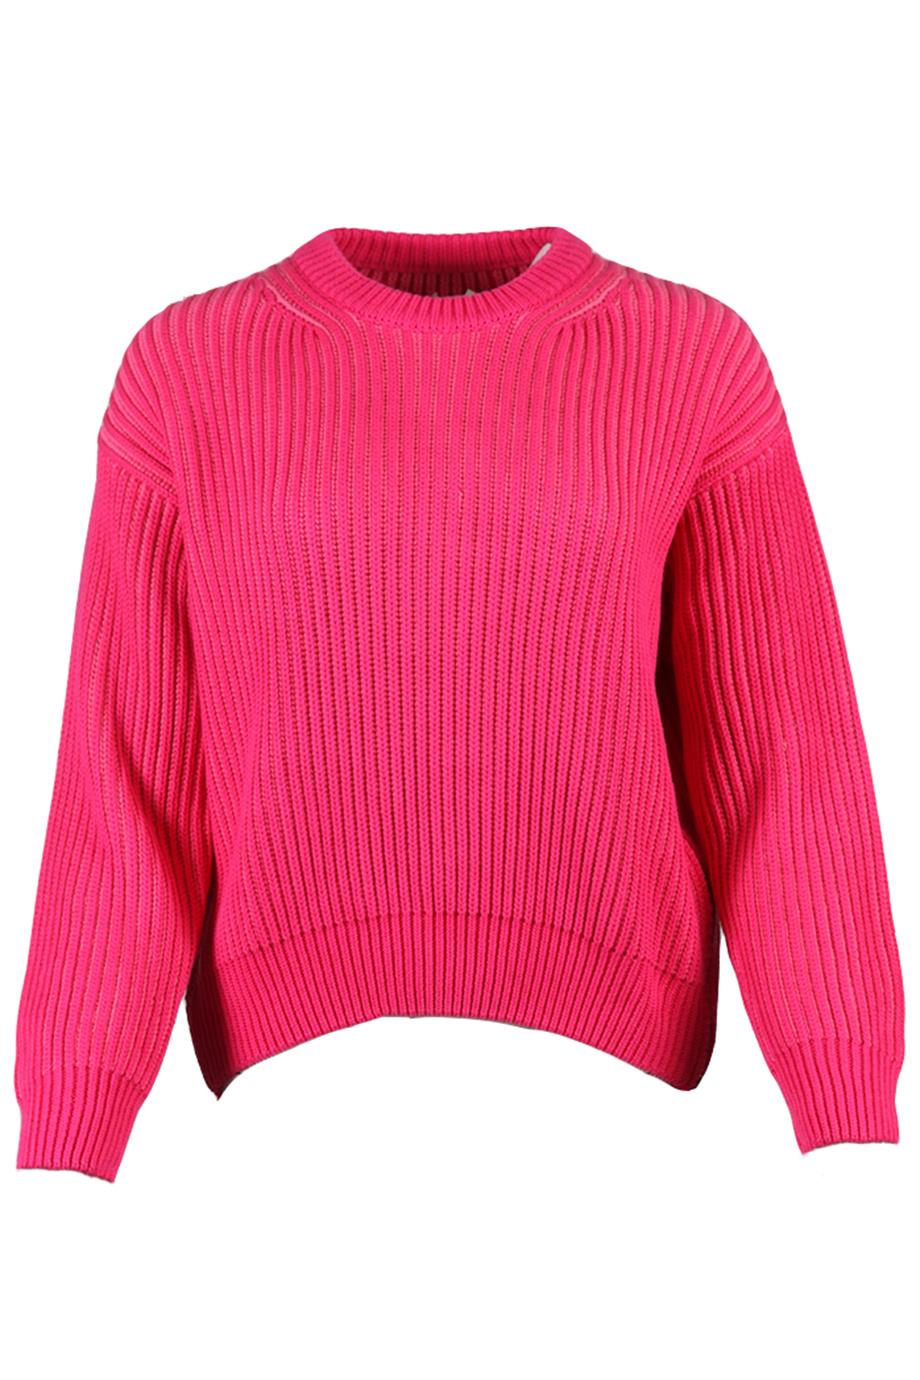 PACO RABANNE COTTON SWEATER XSMALL-SMALL